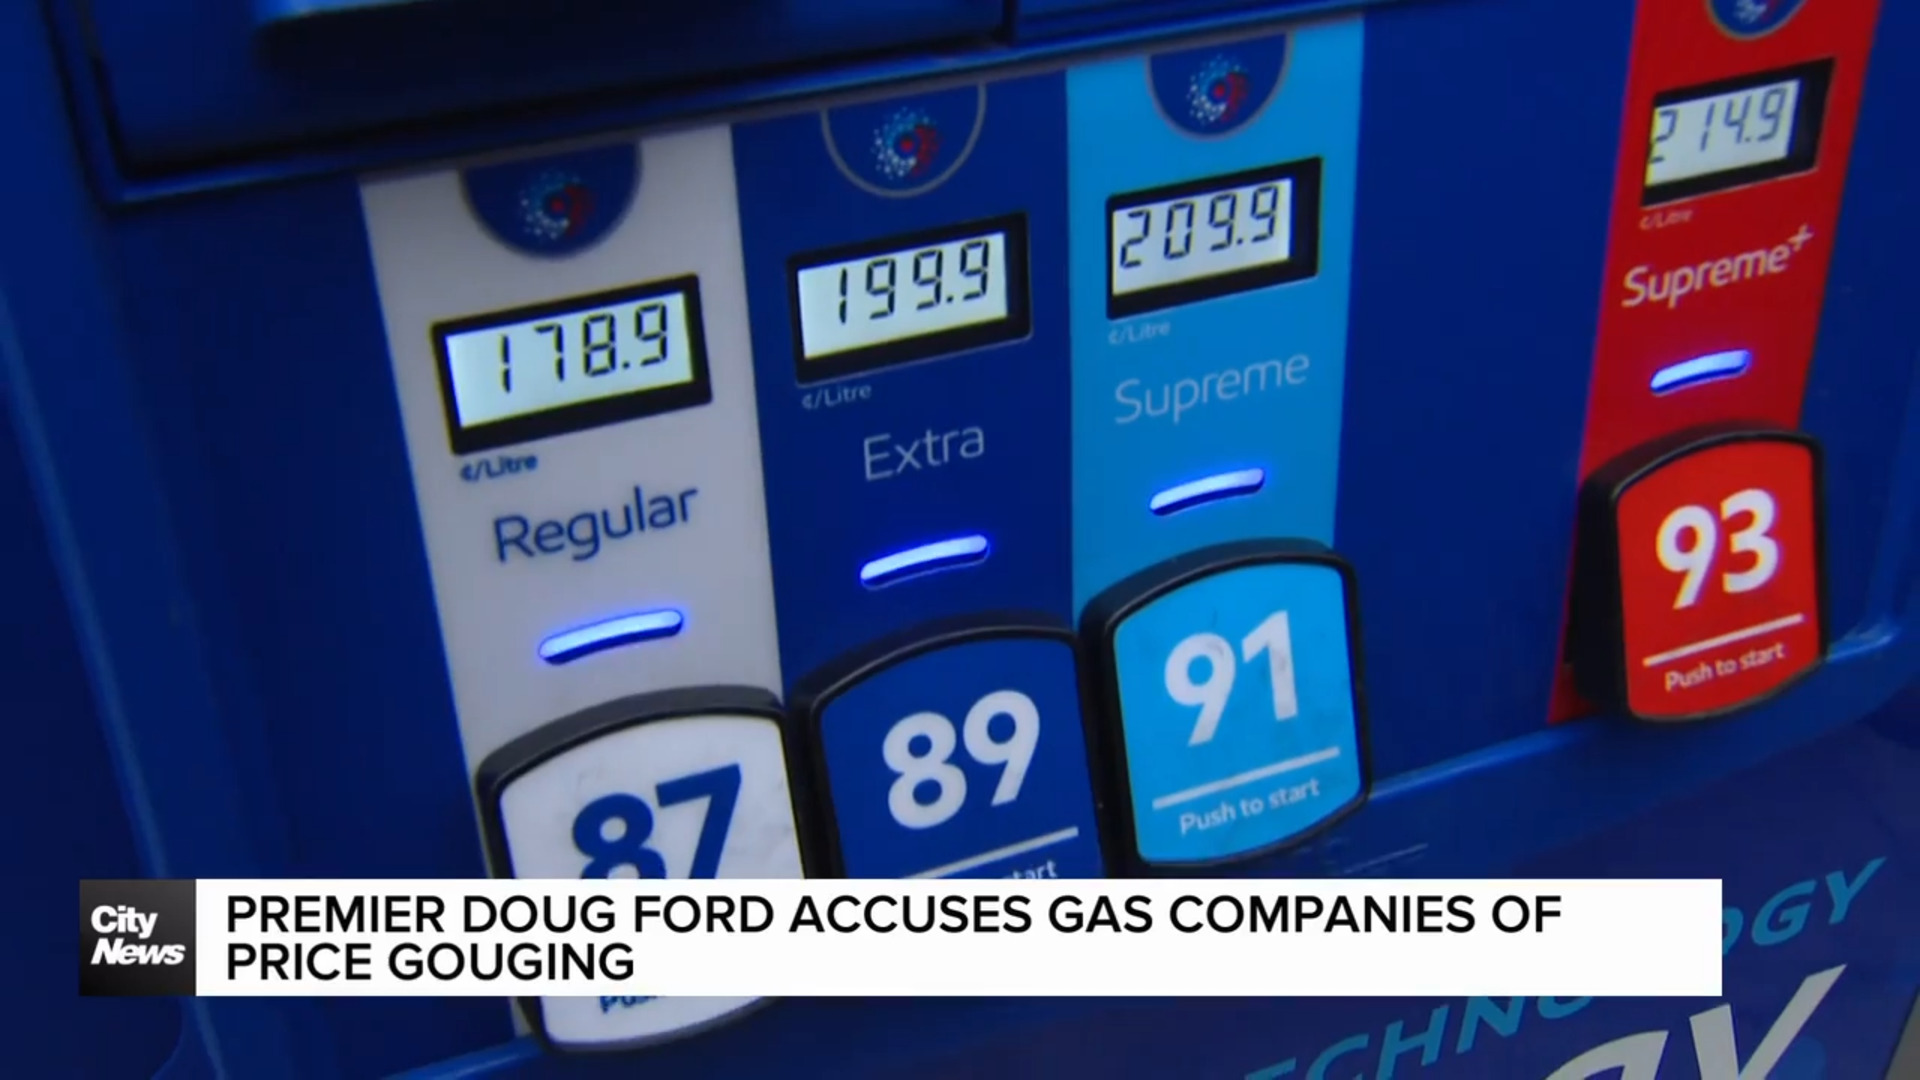 Premier Doug Ford accuses gas companies of price gouging